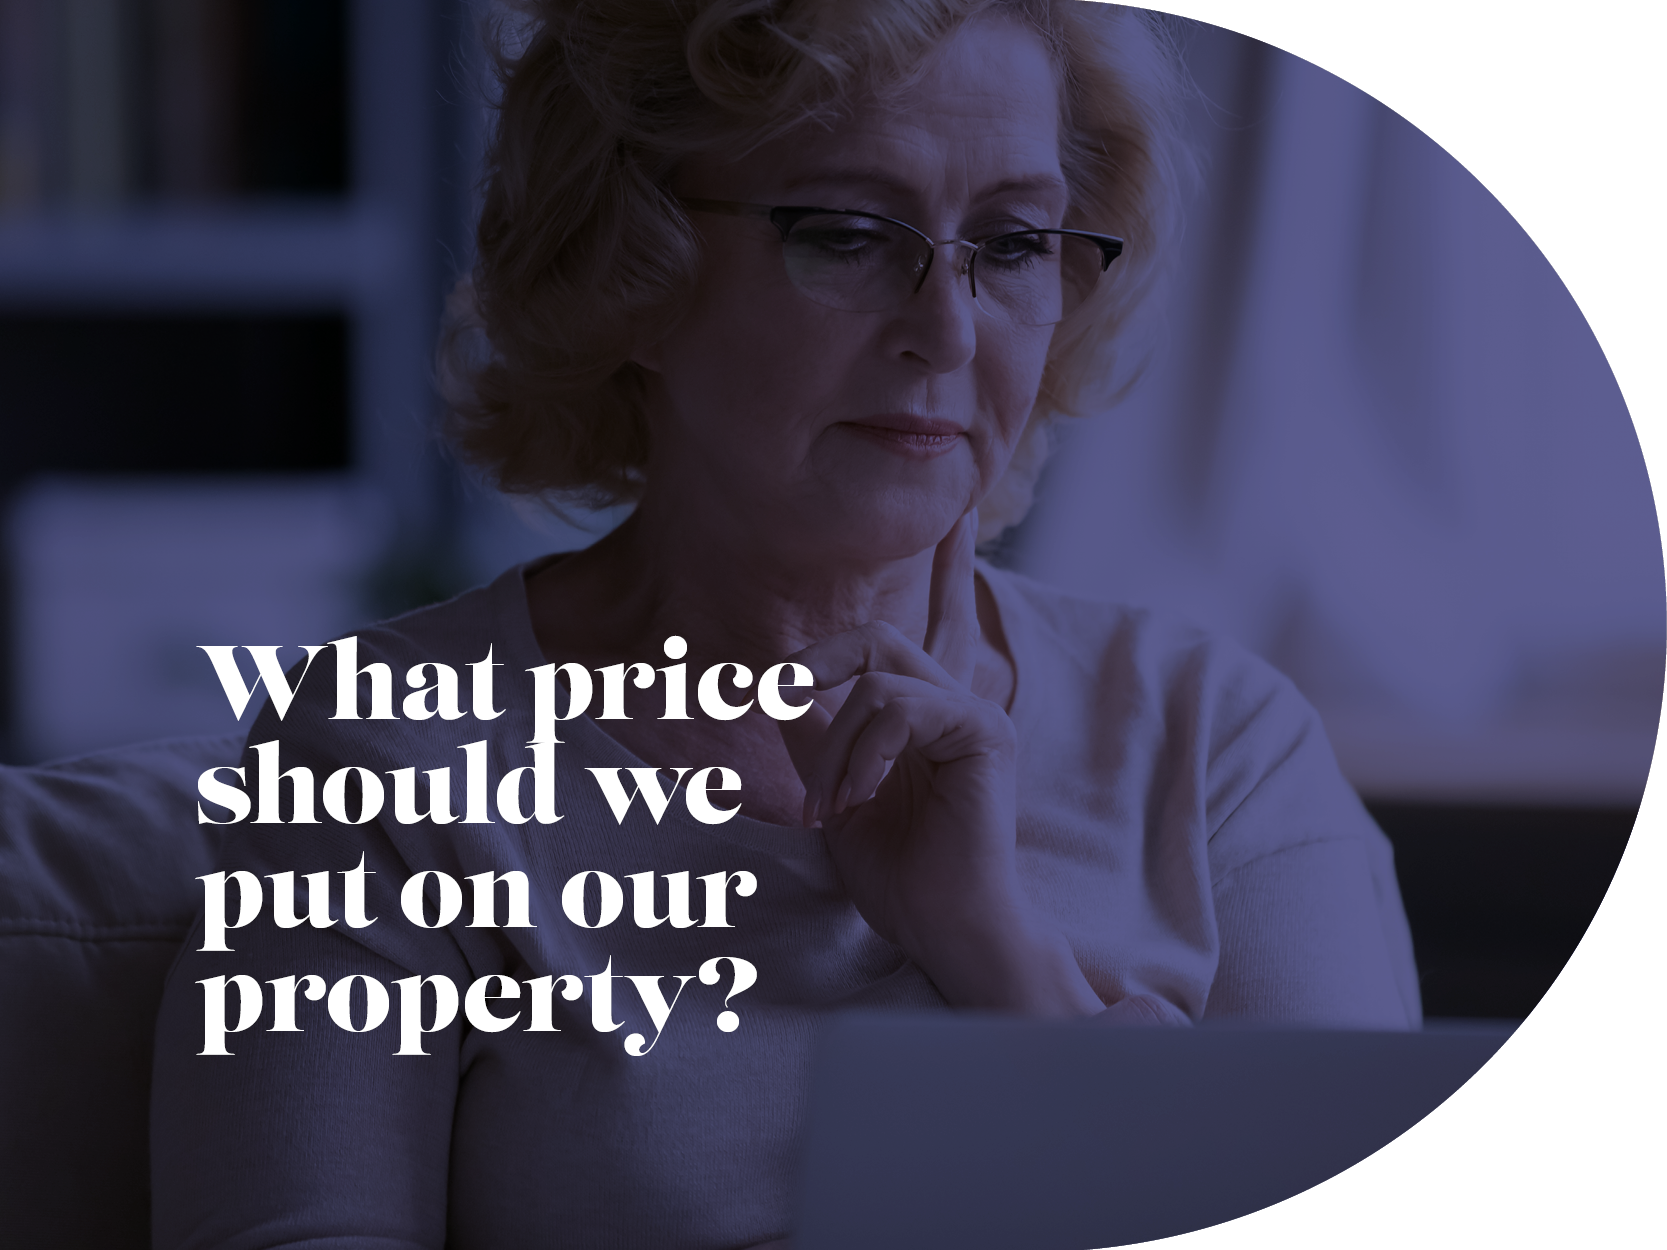 What price should we put on our property?